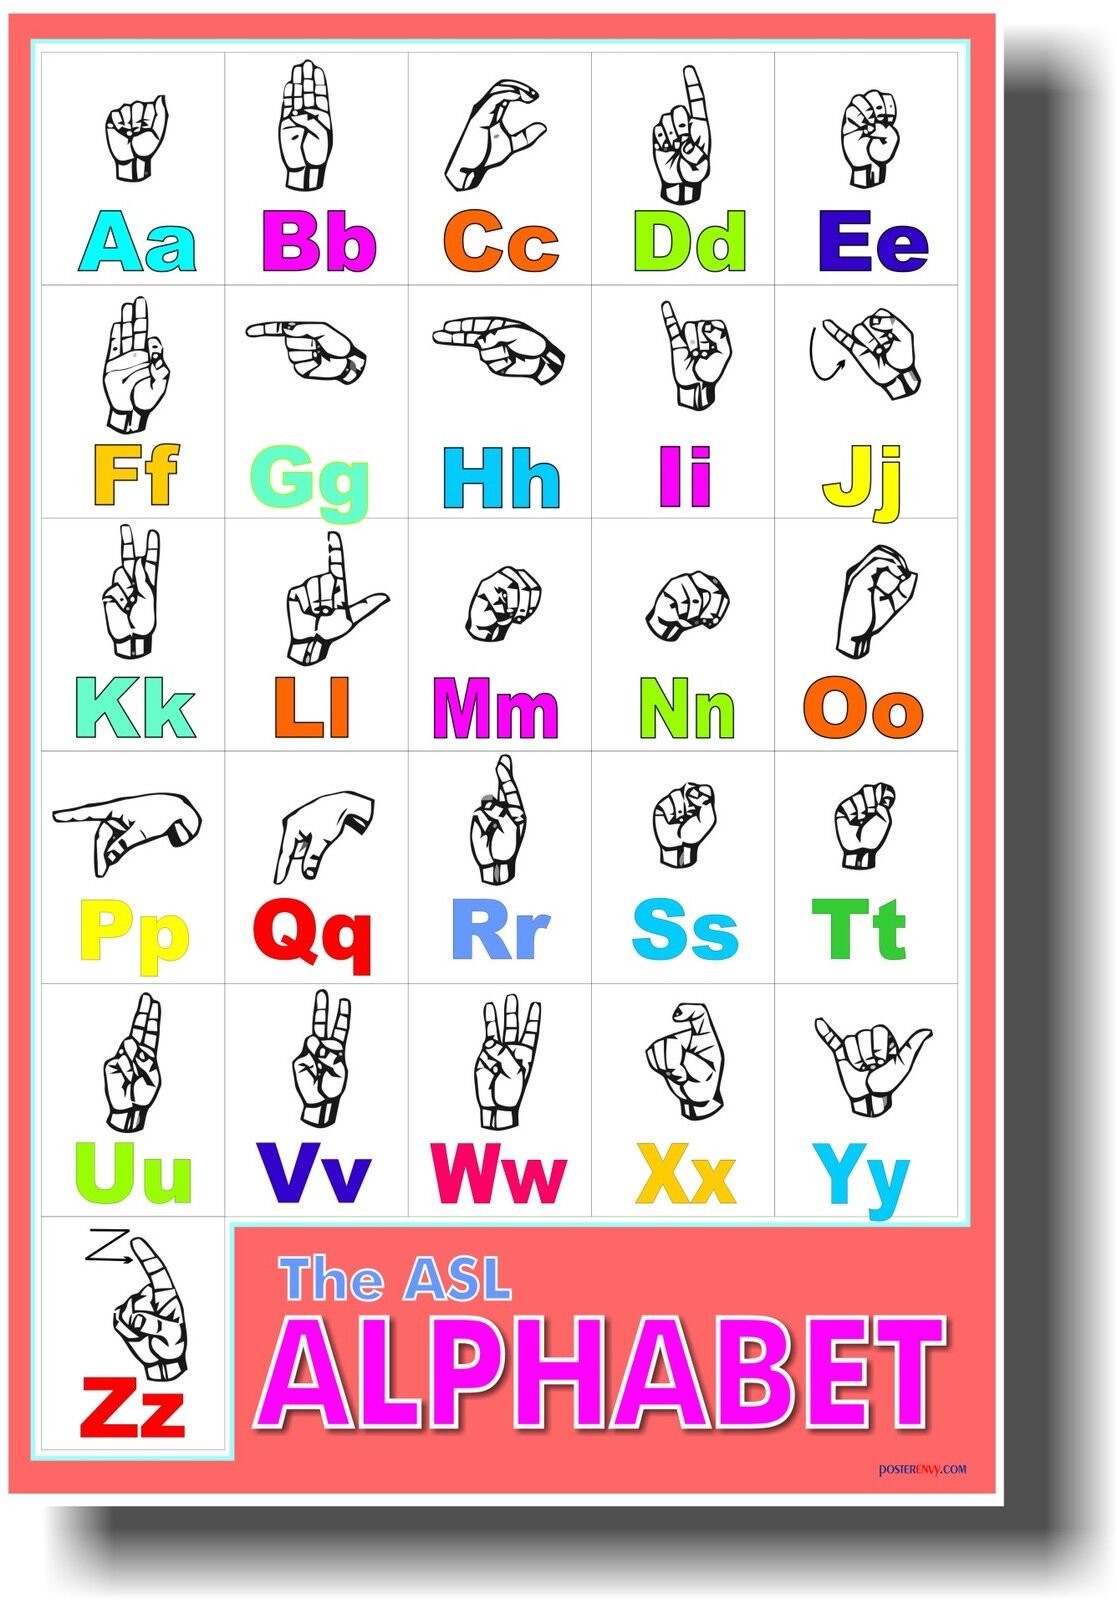 American Sign Language Alphabet - ASL Classroom Hearing Impaired NEW